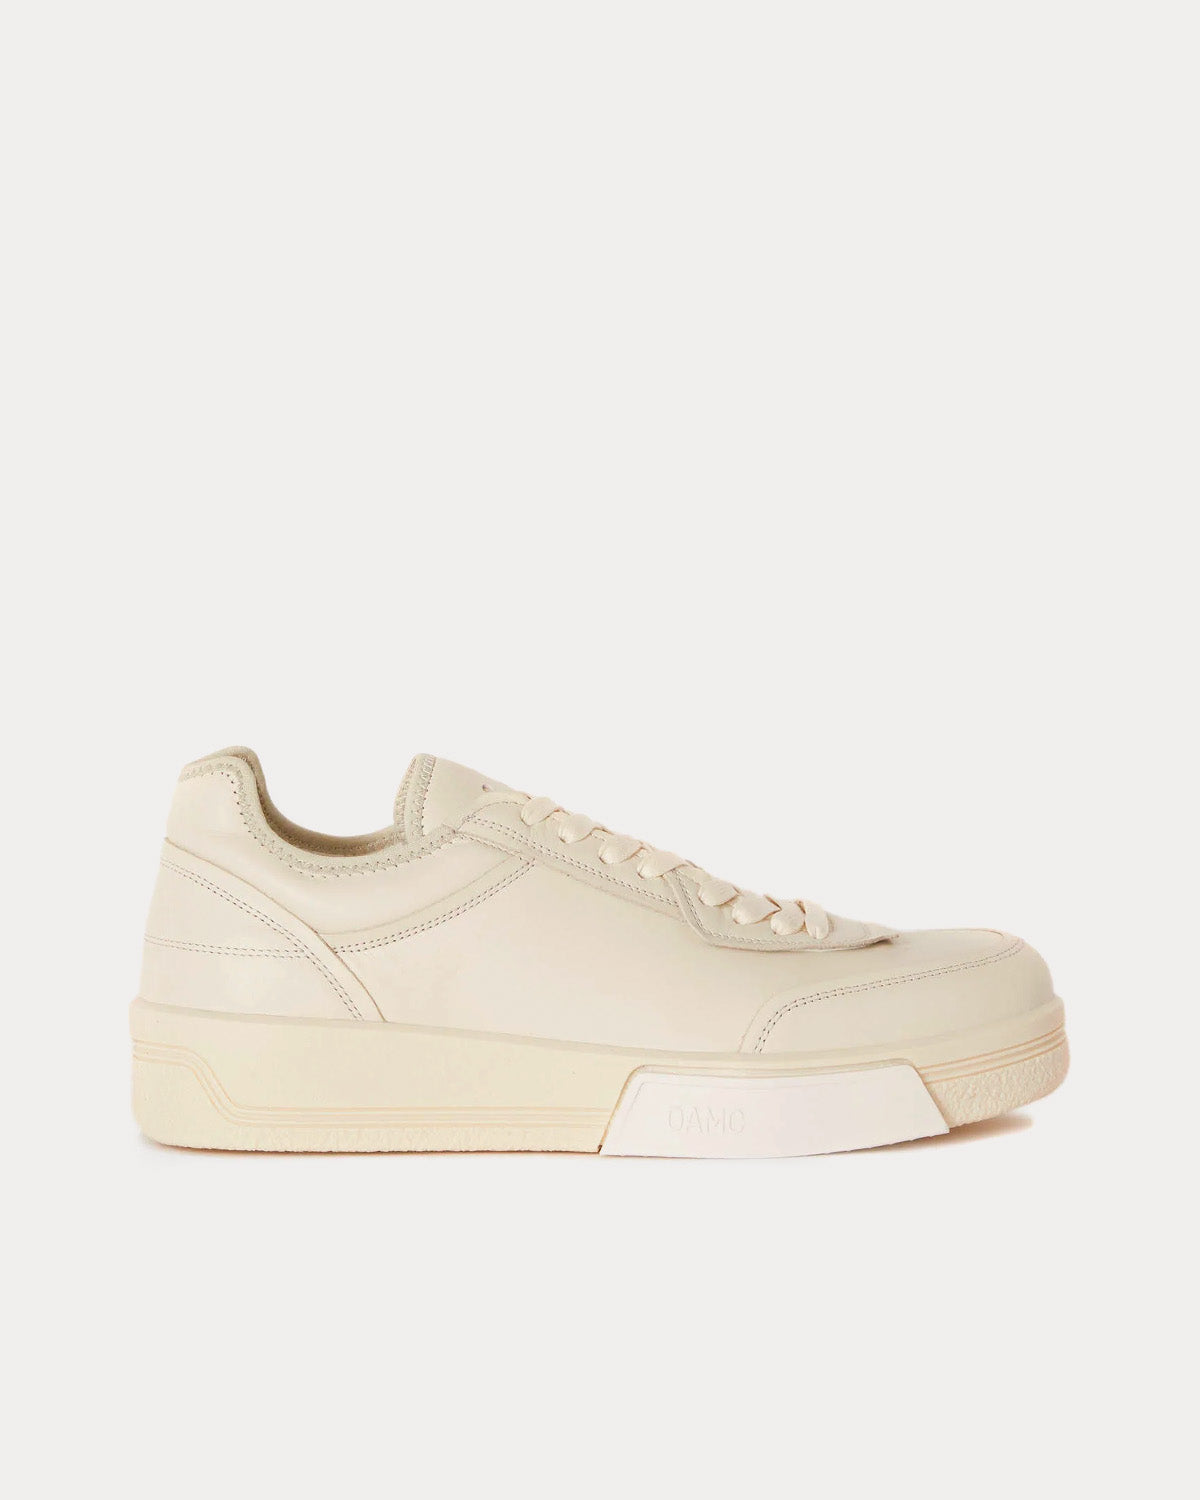 OAMC - Cosmos Cupsole Off-White Low Top Sneakers